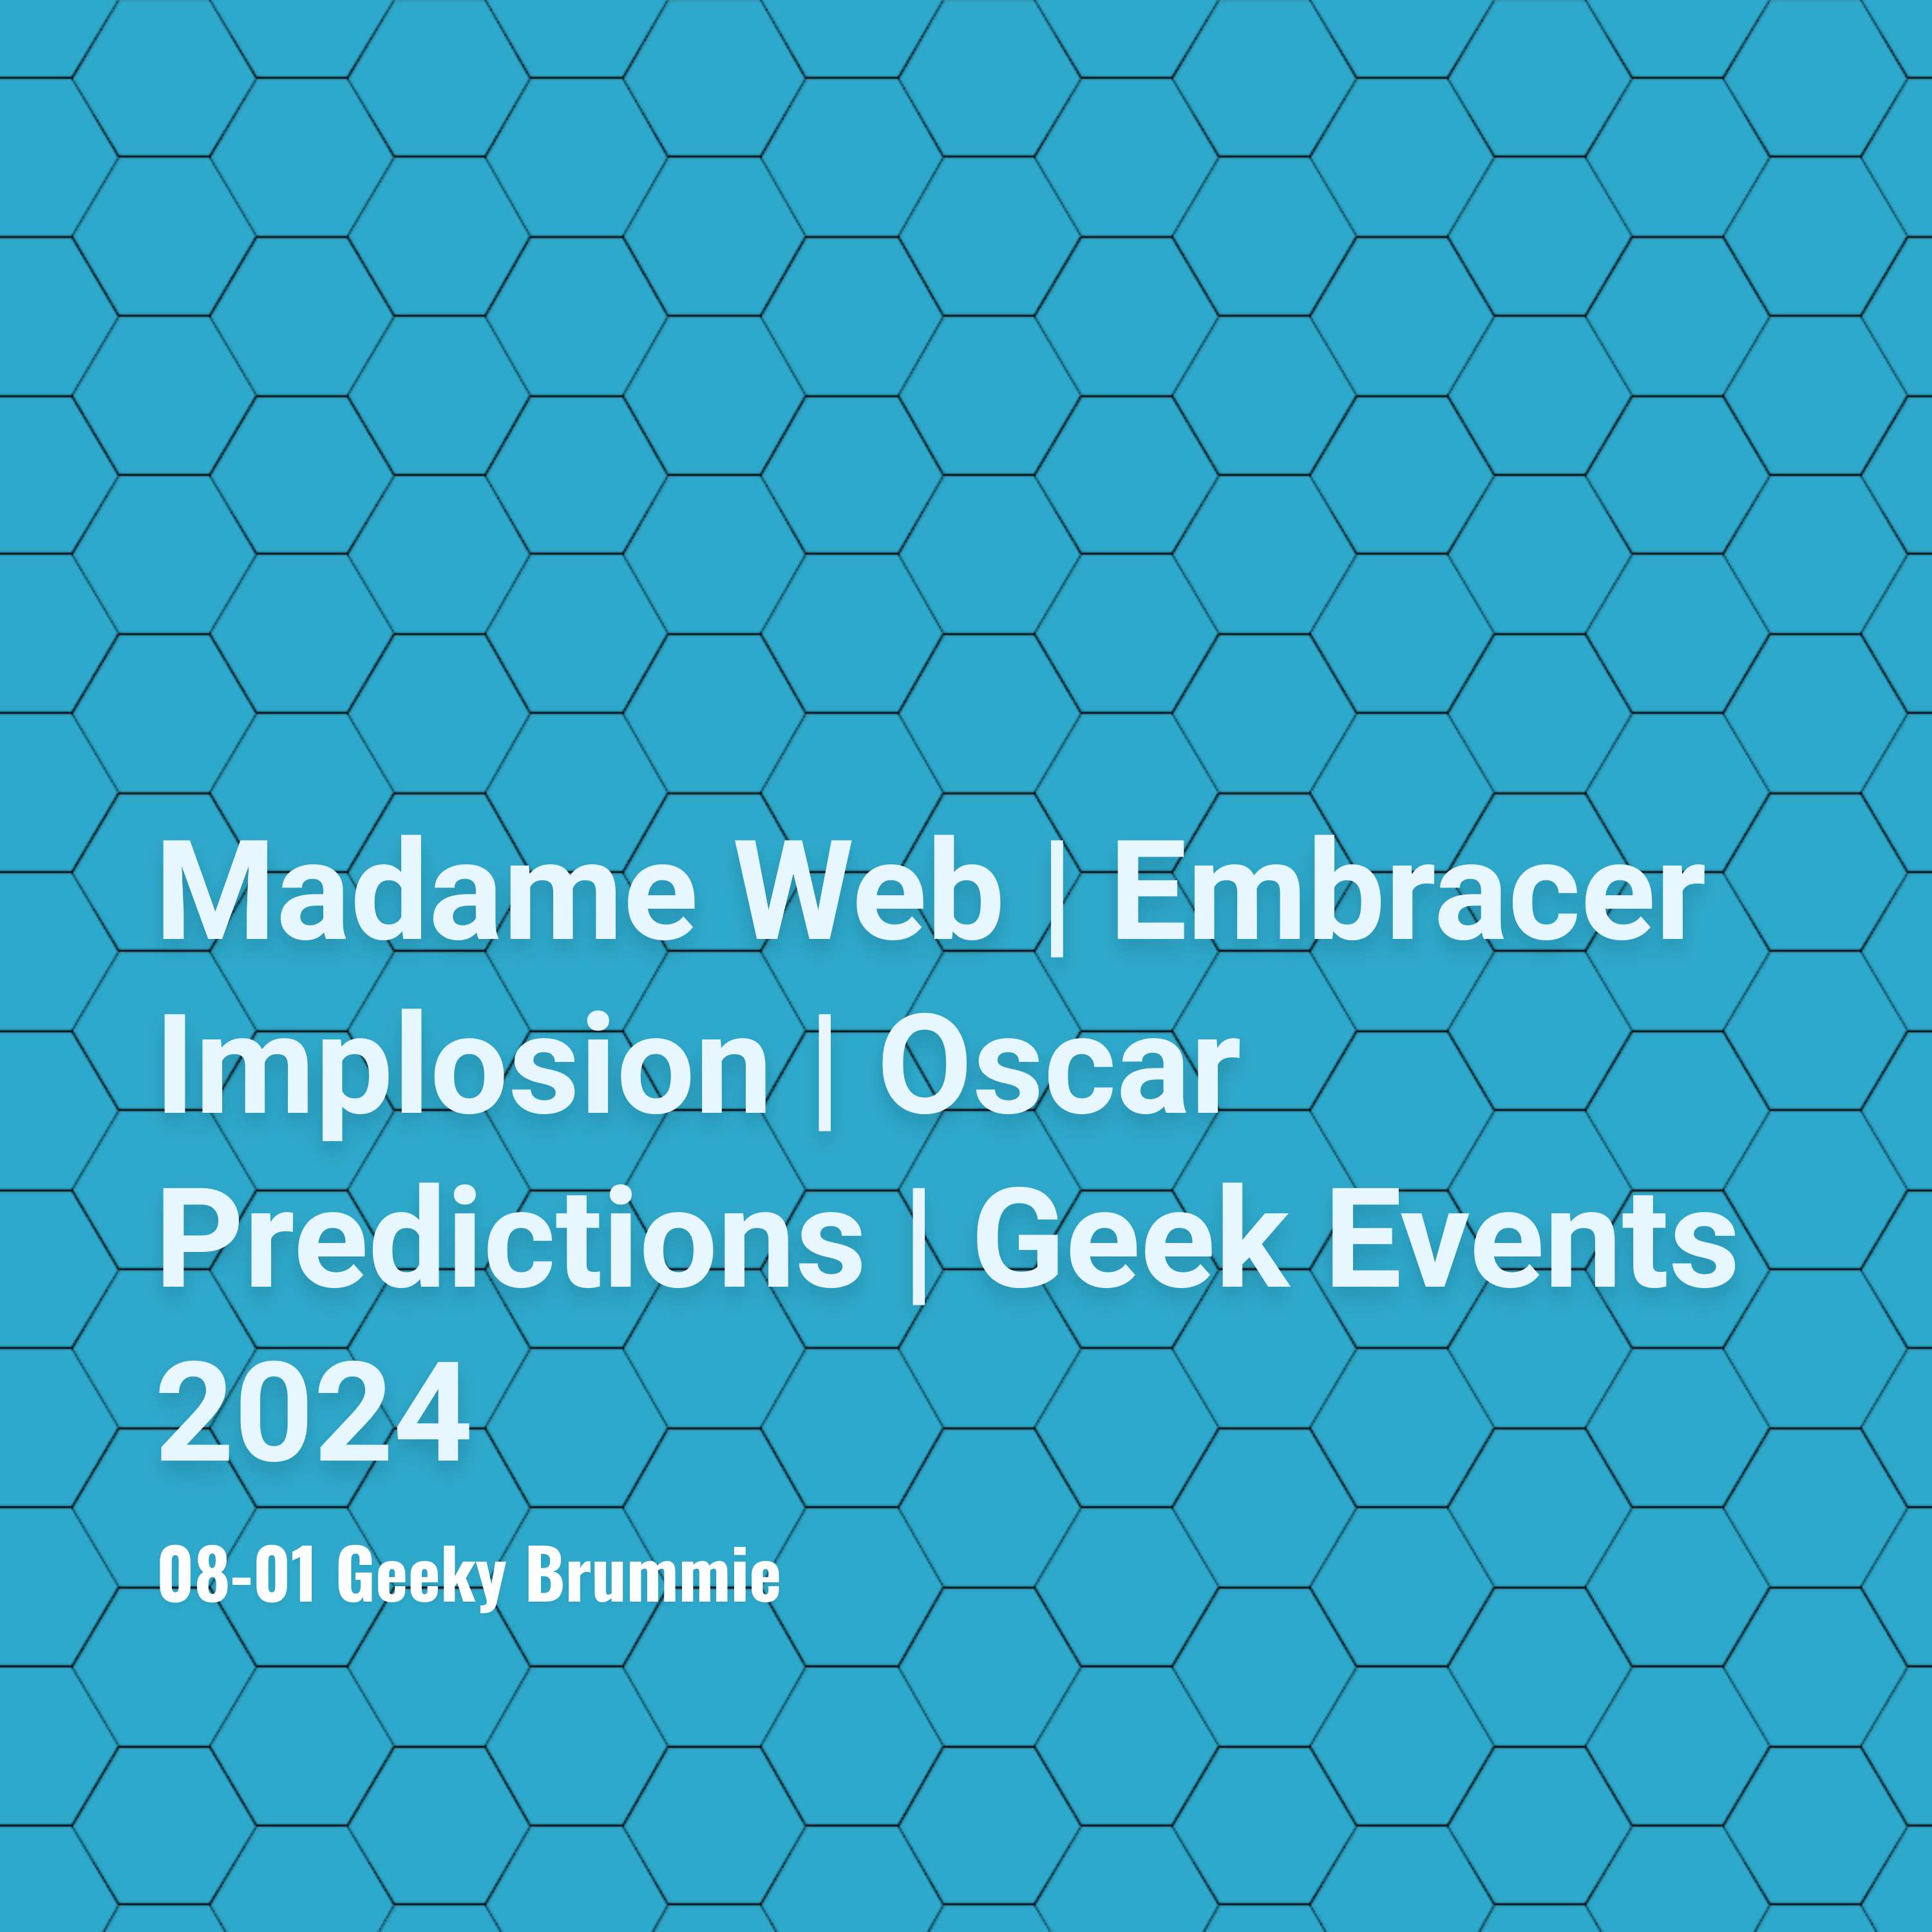 Madame Web | Embracer Implosion | Oscar Predictions | Geek Events in 2024